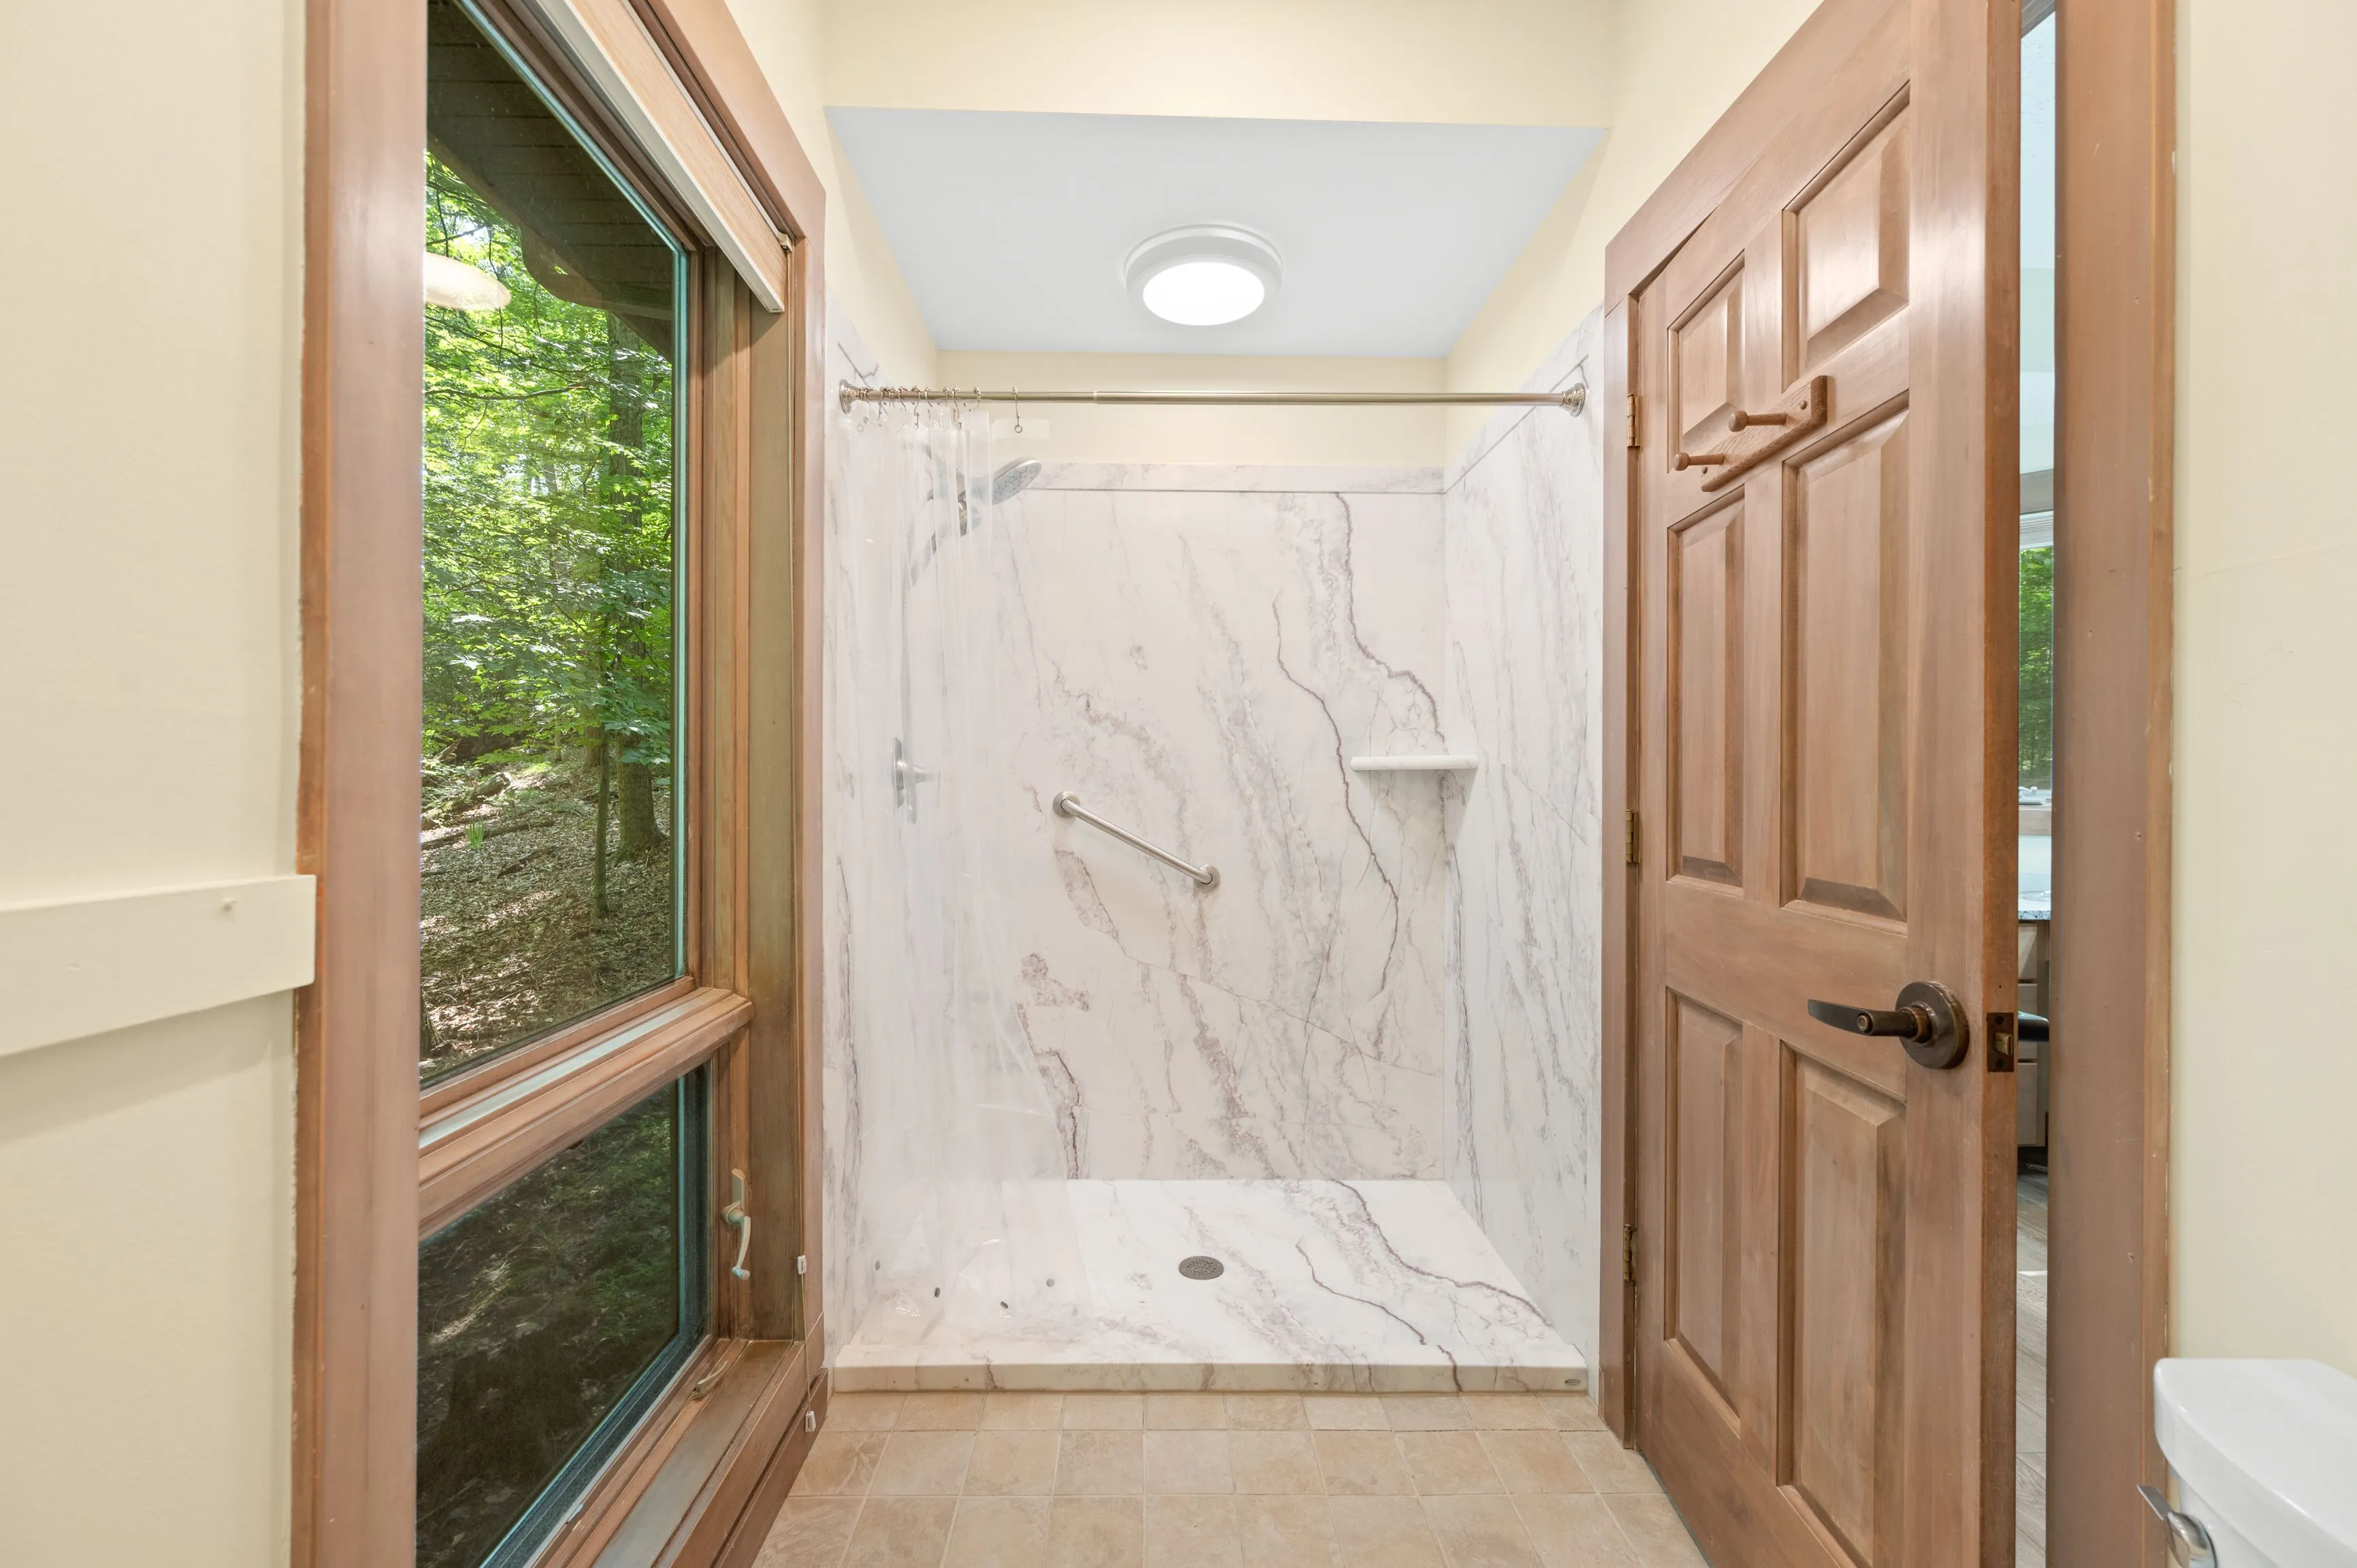 Interior of a modern bathroom with a large walk-in shower, wooden doors, and a window overlooking greenery.